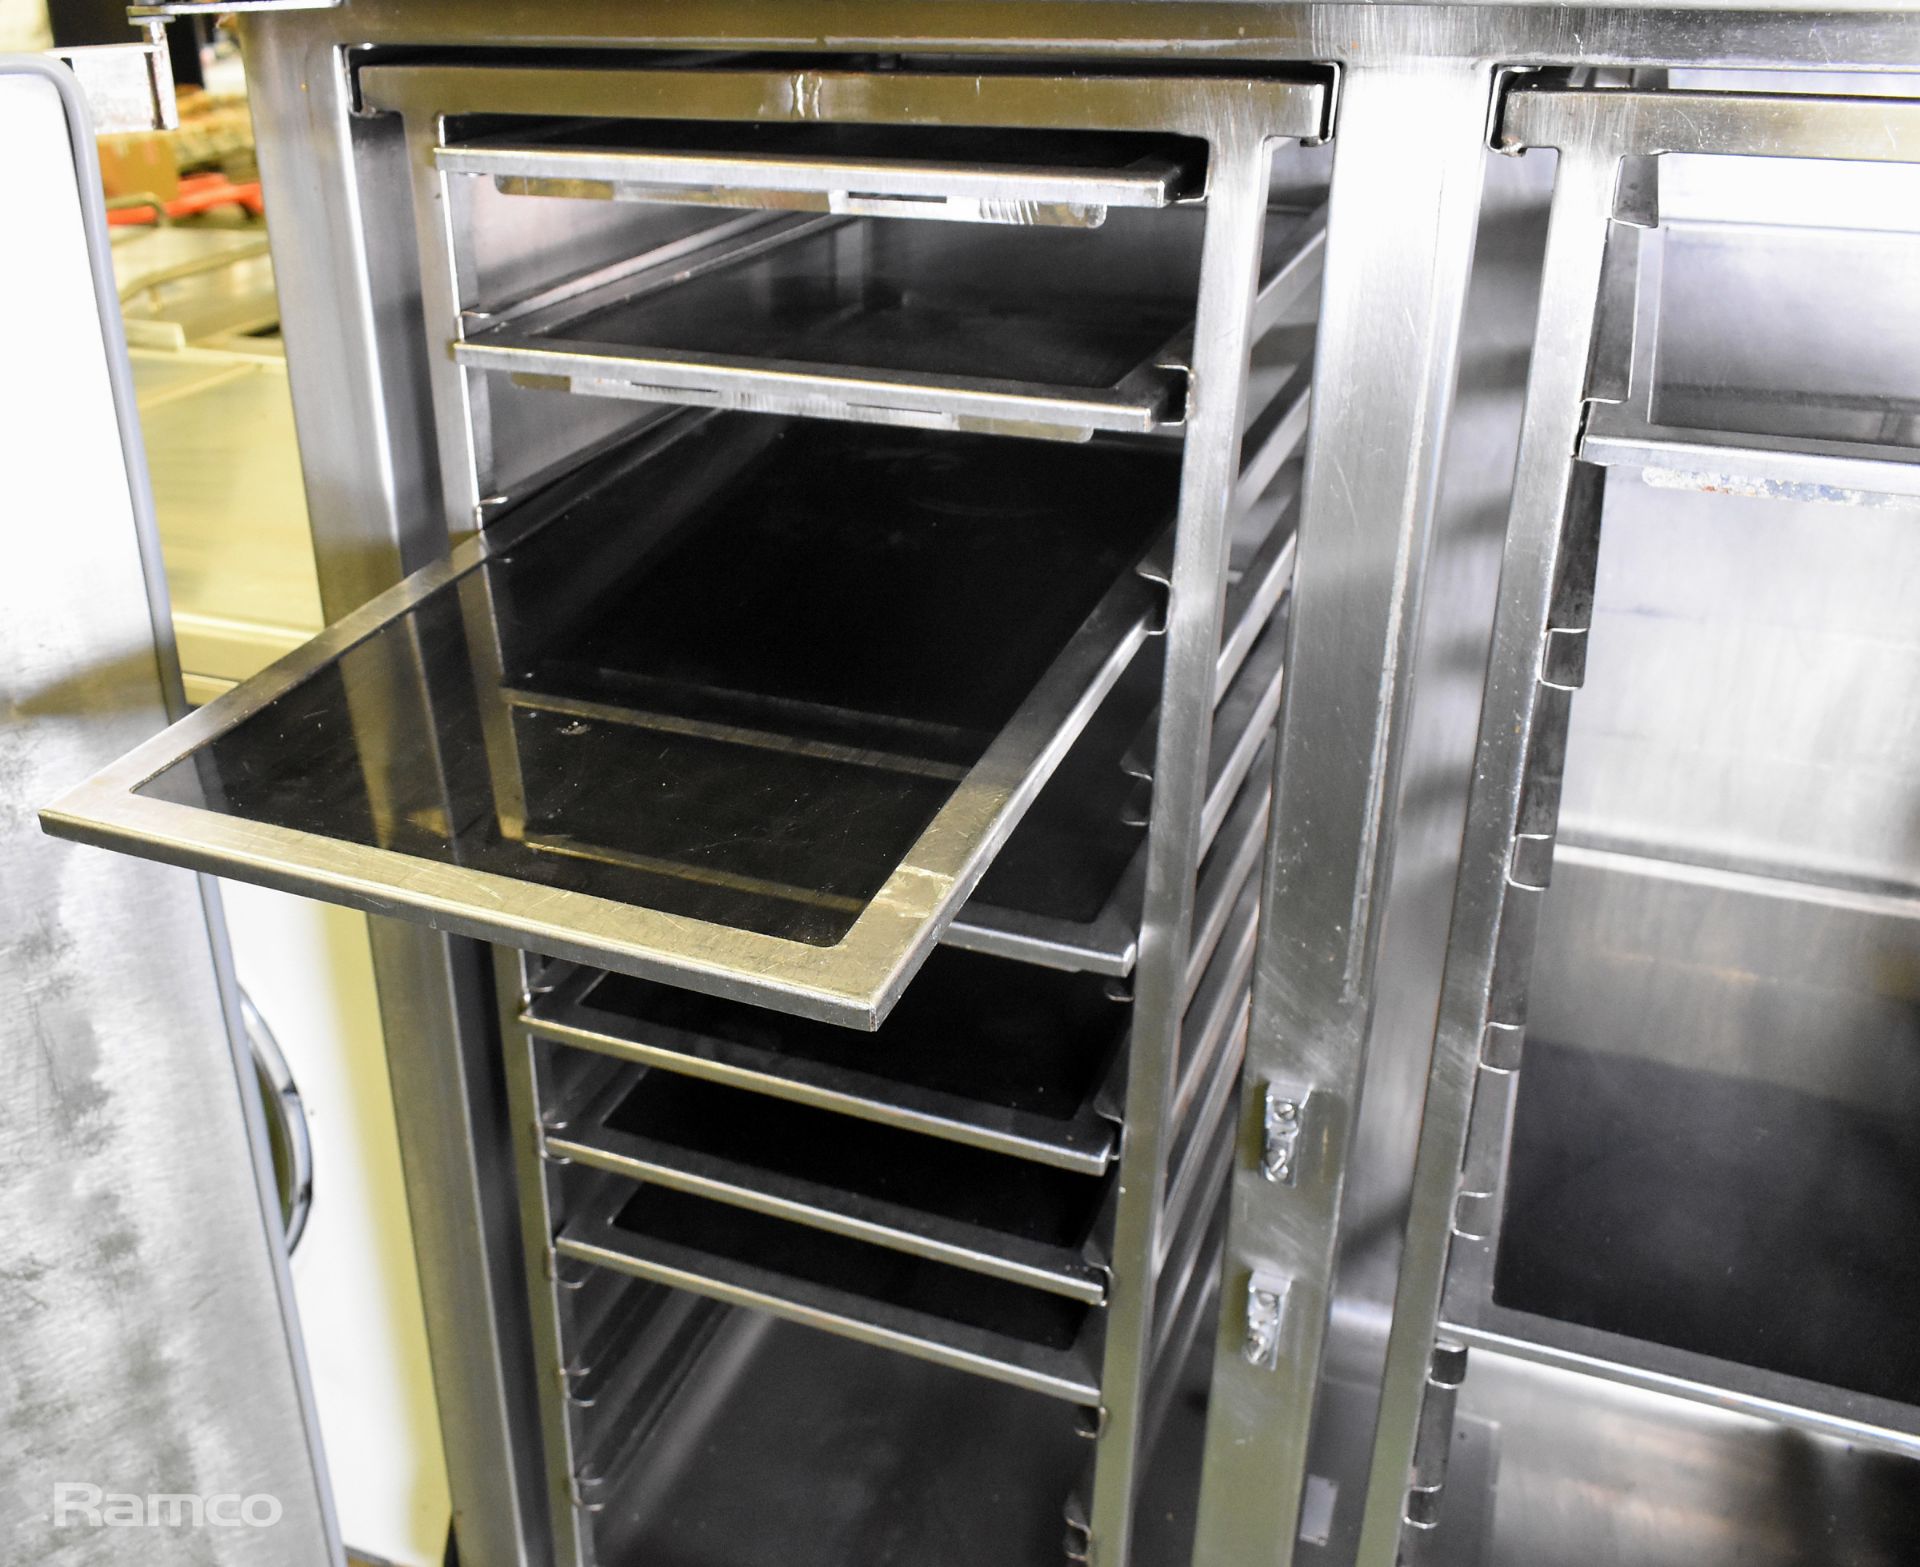 Moffat stainless steel double door heated banquet trolley - W 680 x D 1080 x H 1440mm - AS SPARES - Image 3 of 10